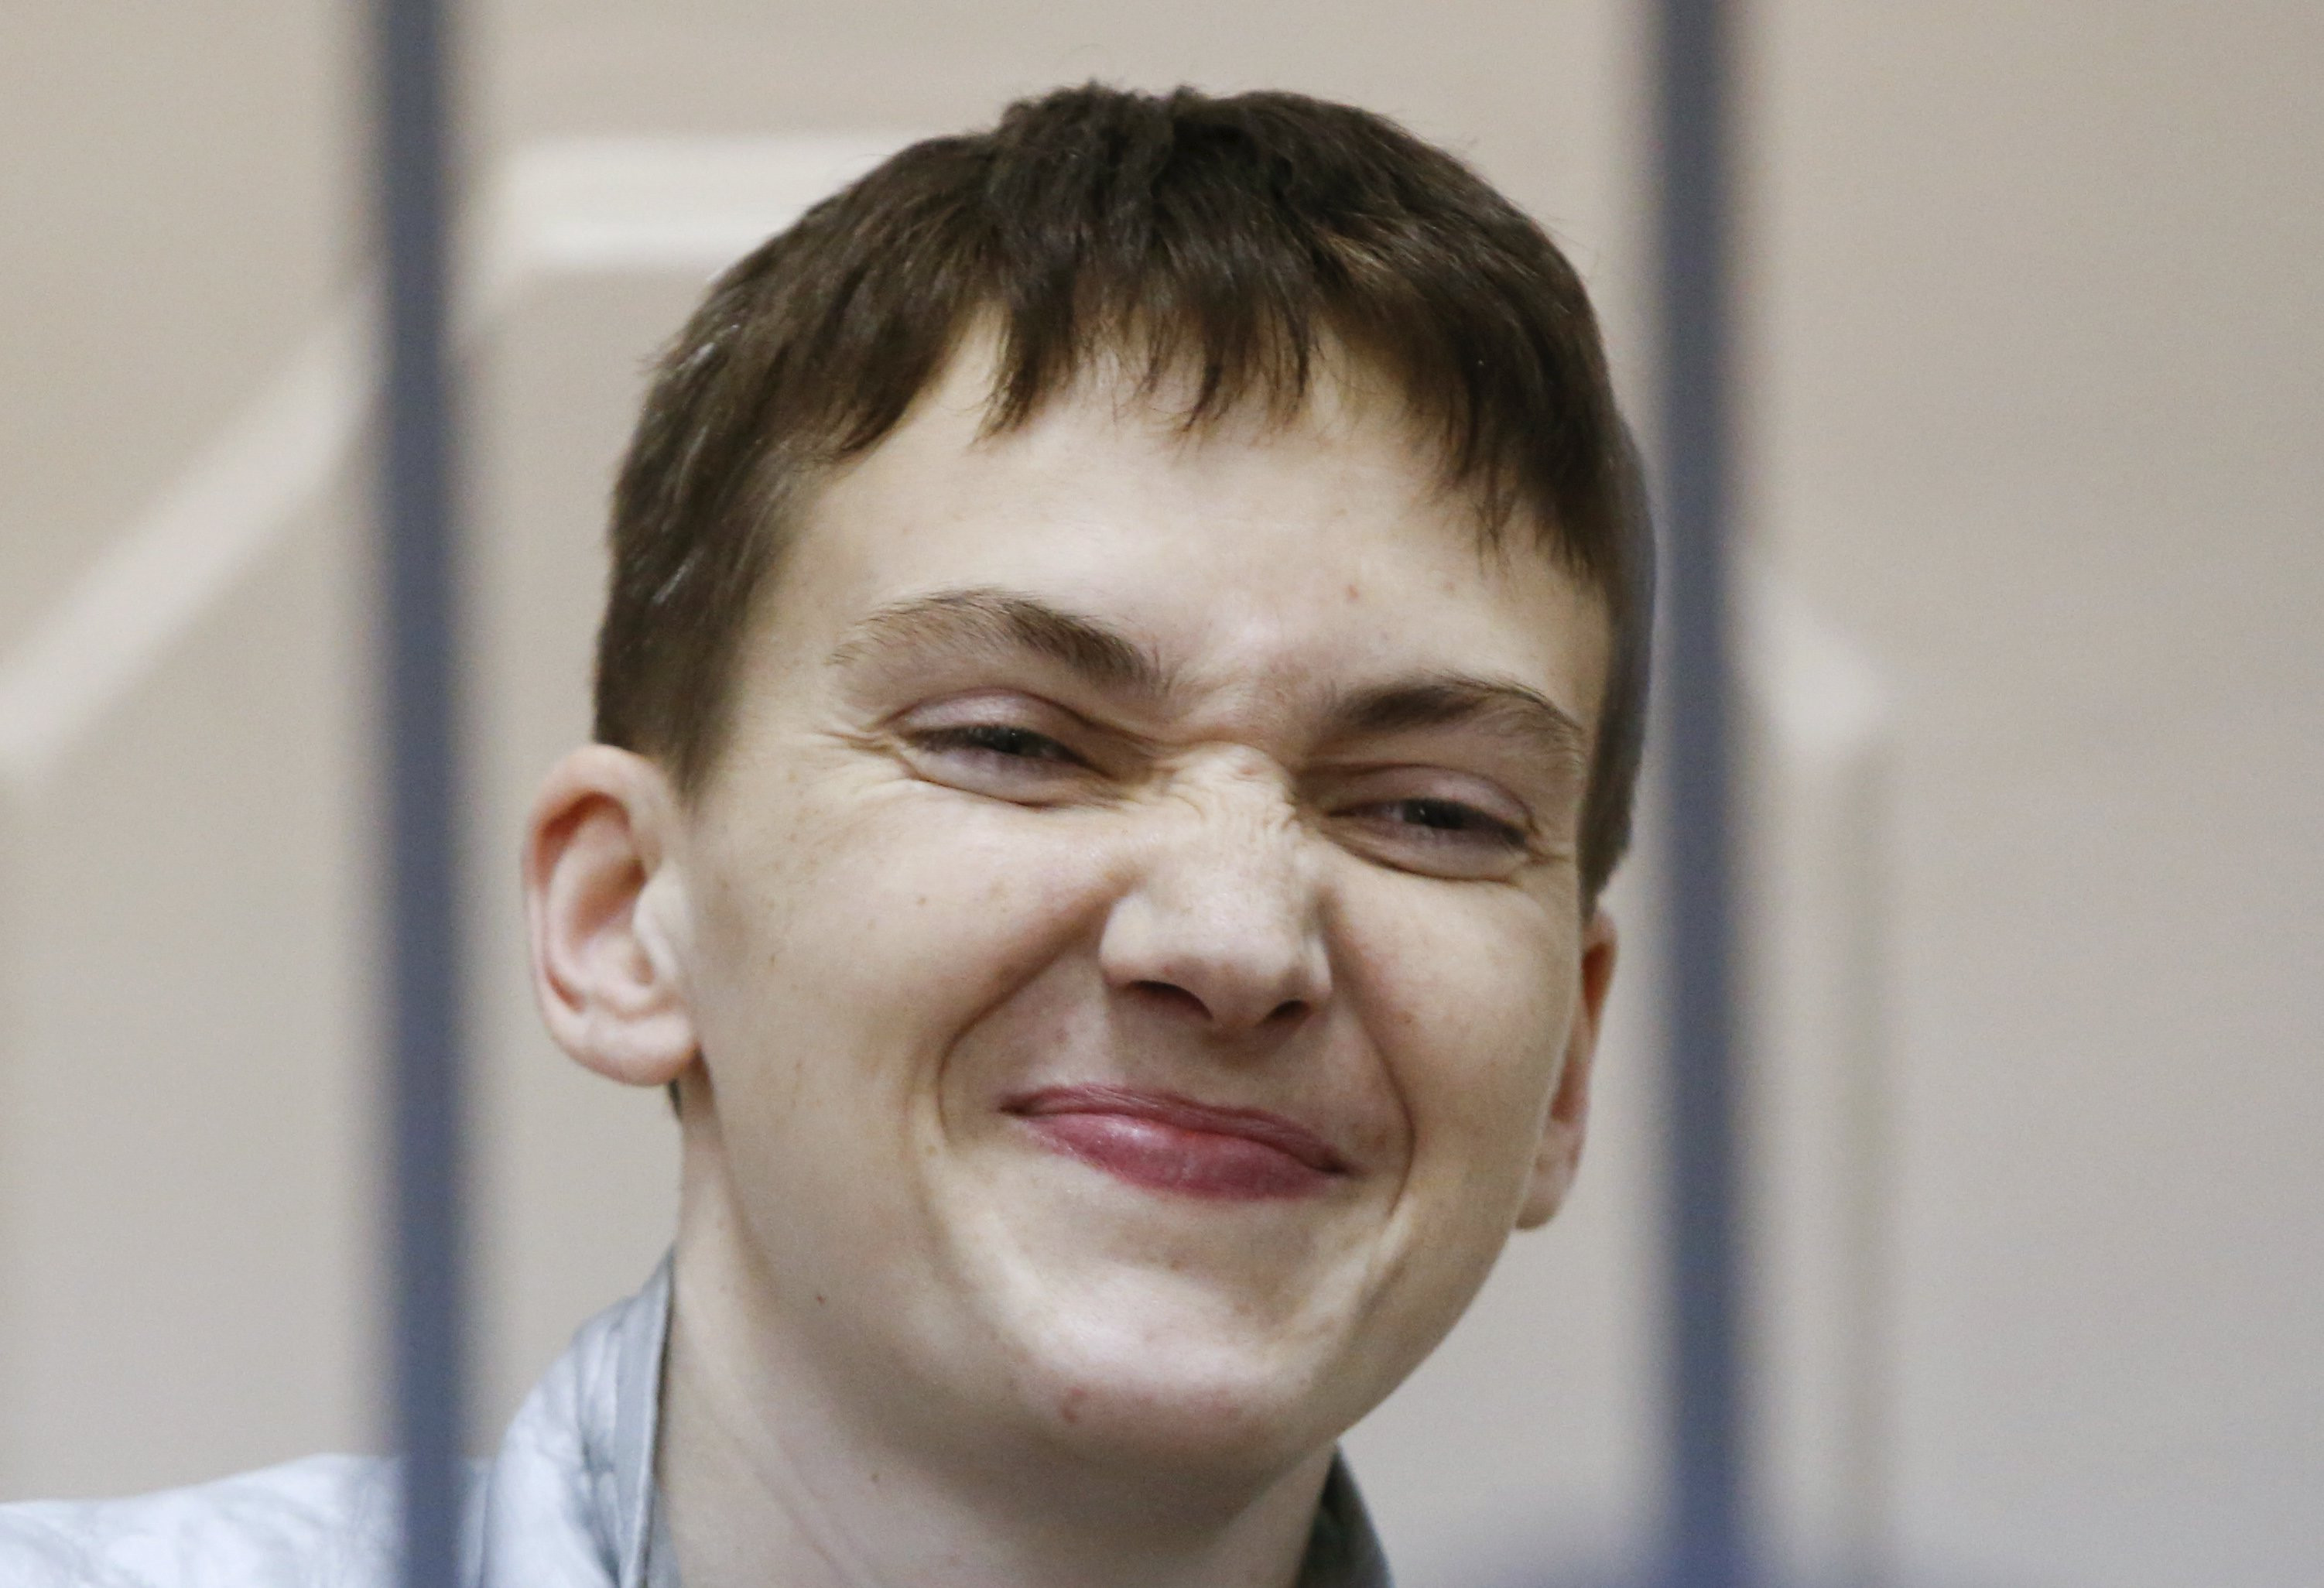 Ukrainian military pilot Nadezhda Savchenko reacts inside a defendant's cage during a court hearing in Moscow